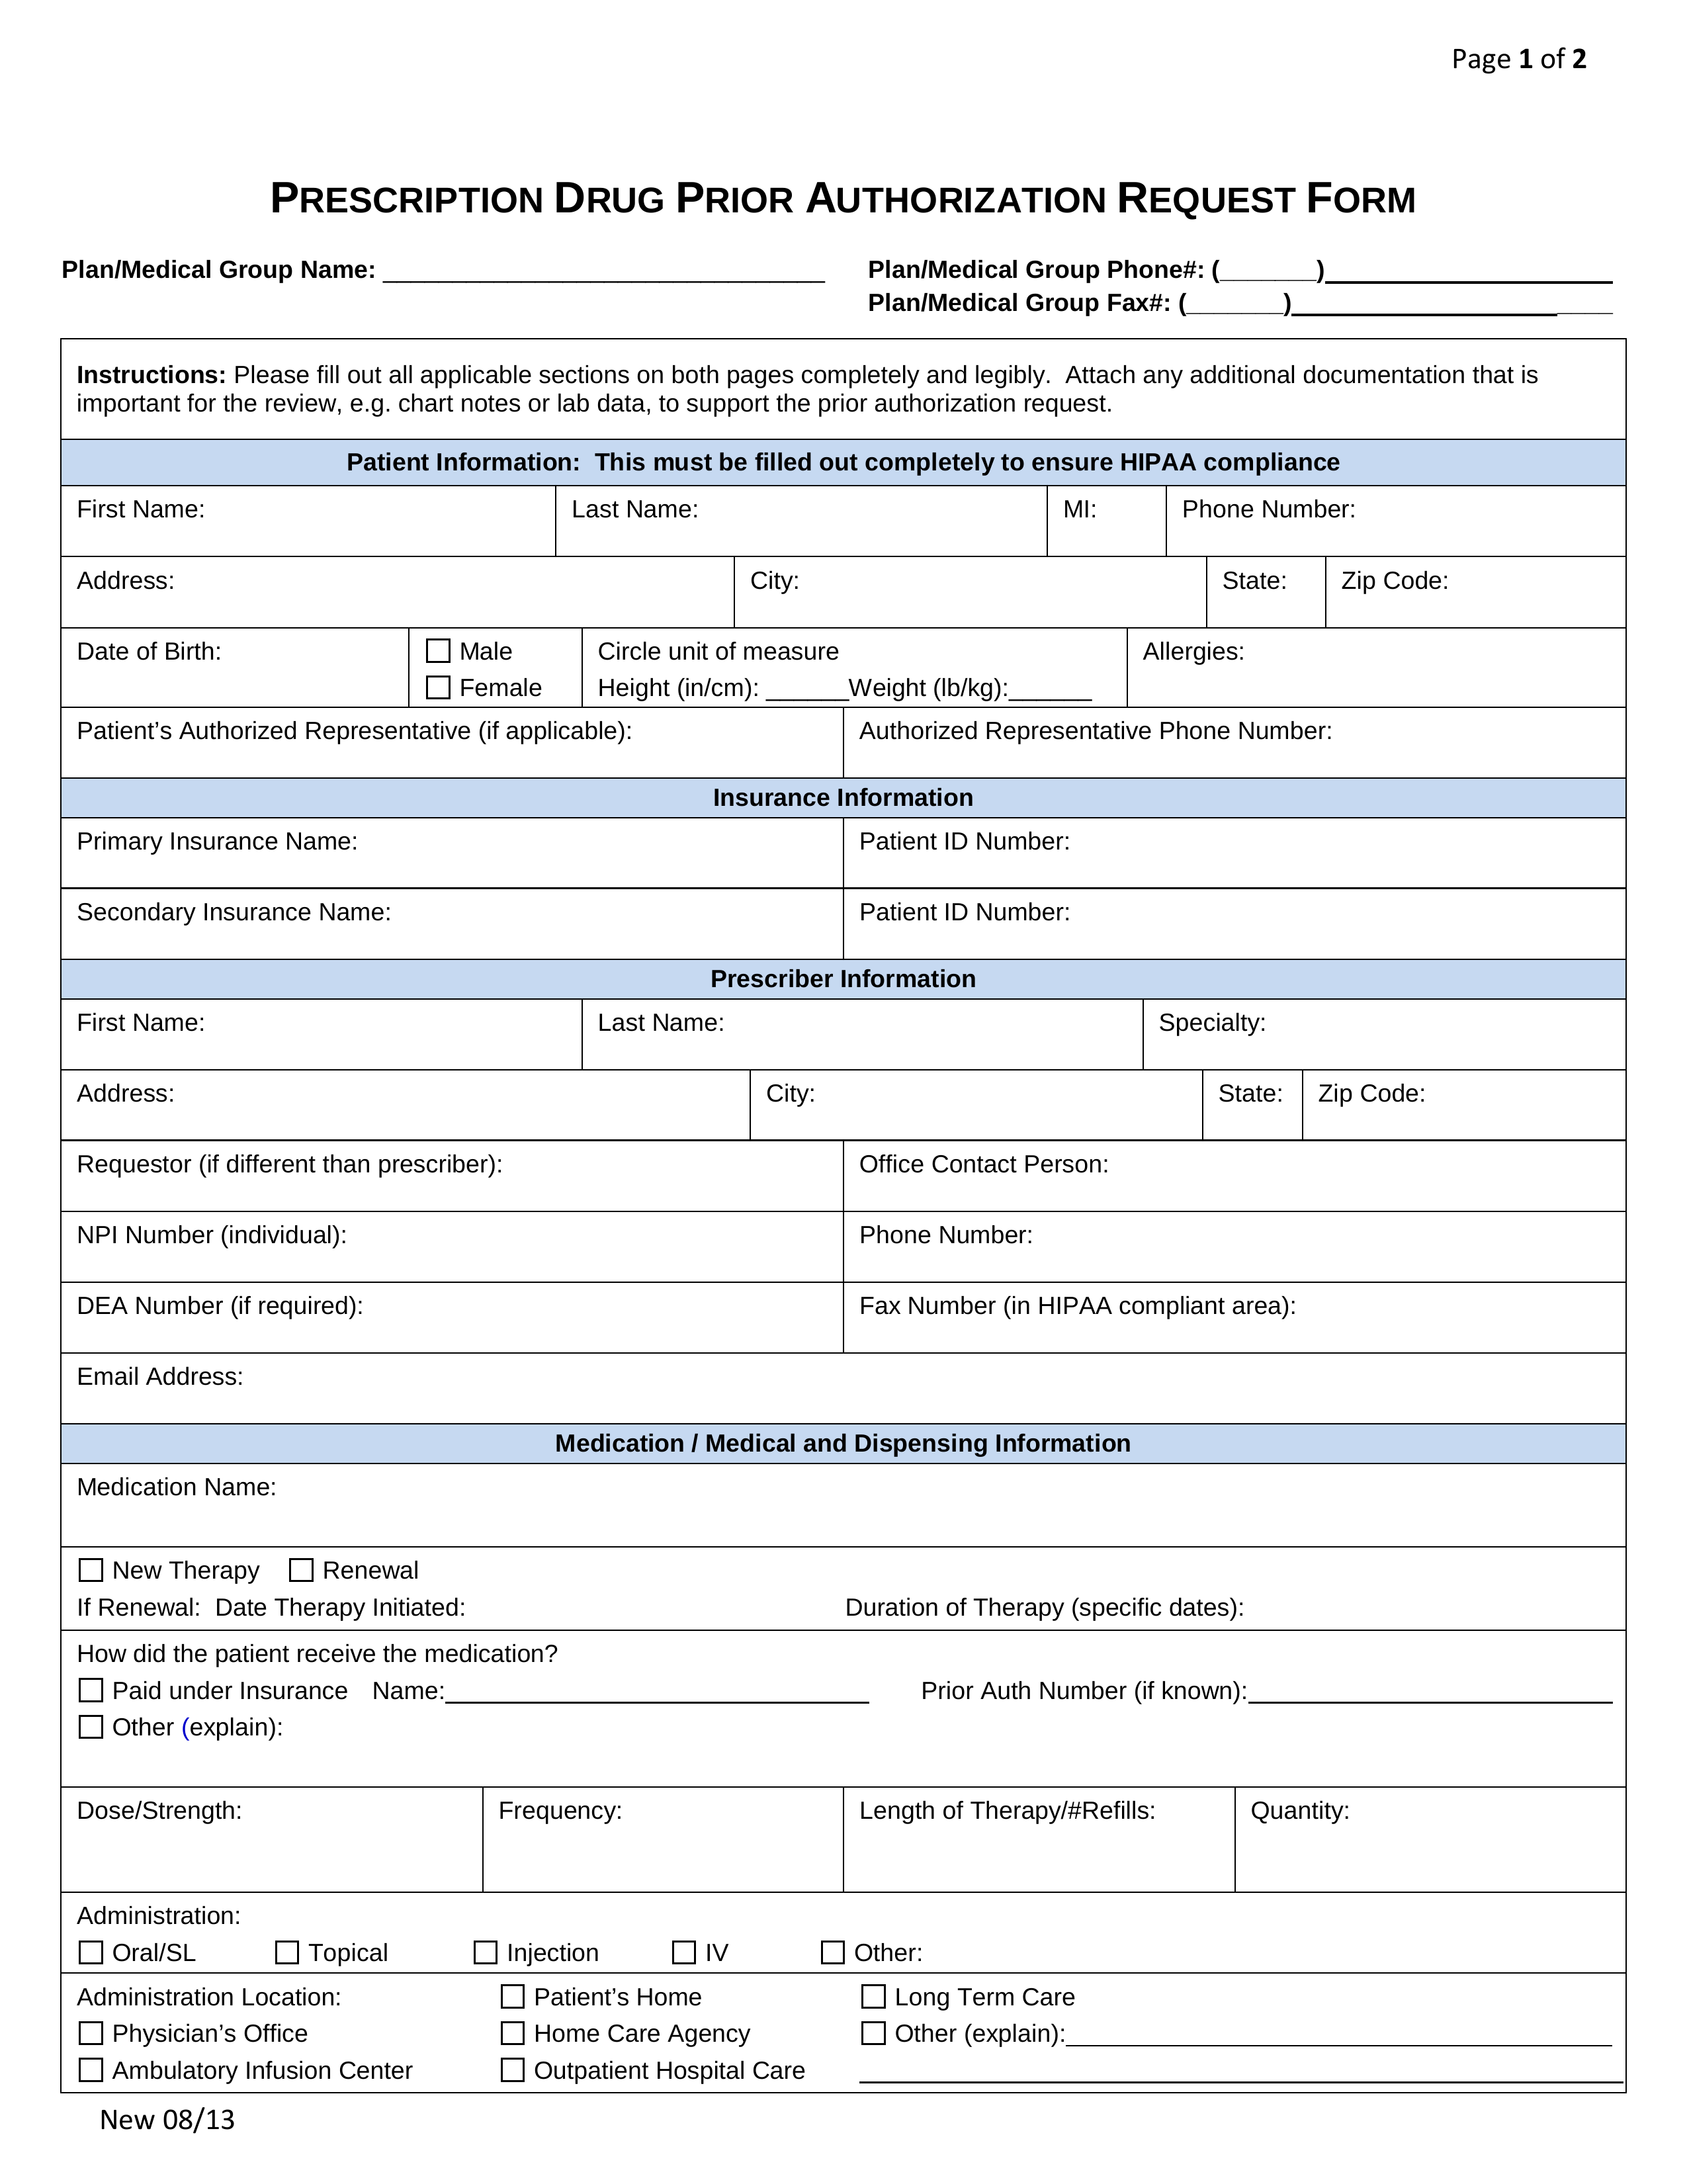 Free Prior Rx Authorization Forms PDF EForms Free Fillable Forms